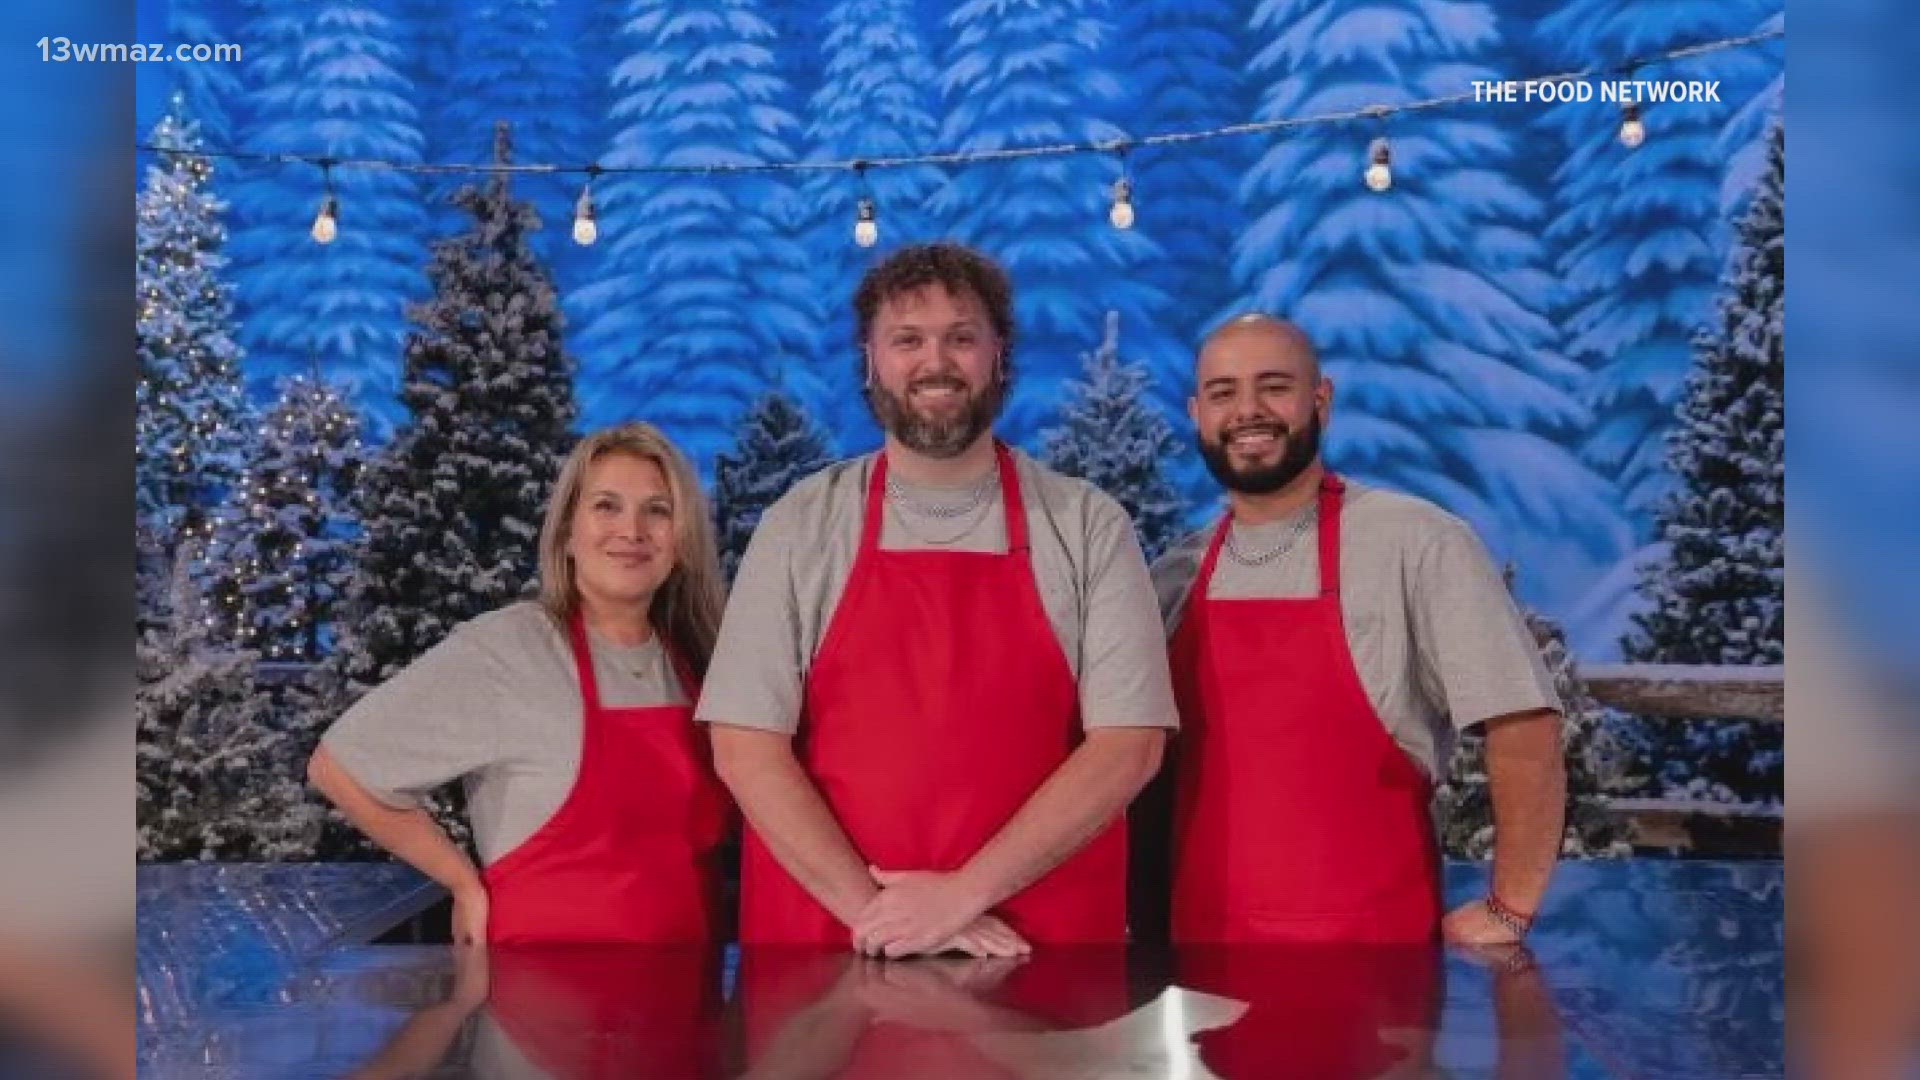 You can normally catch Jones at his Perry store Sweet Evelyn's. Now you can catch him this month as he represents Central Georgia on The Food Network